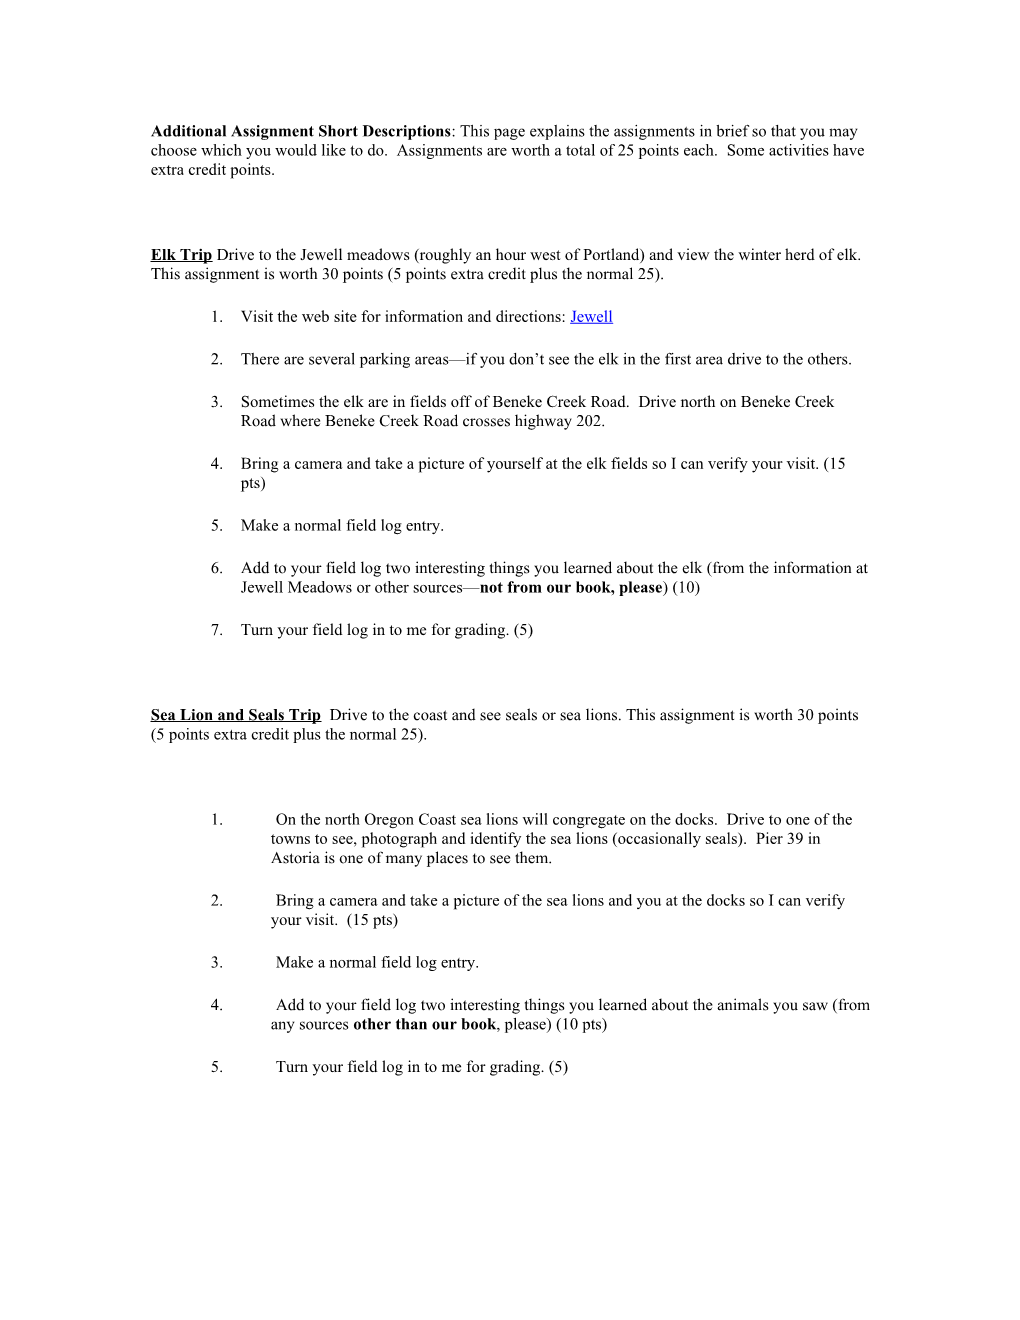 Additional Assignment Short Descriptions: This Page Explains the Assignments in Brief So